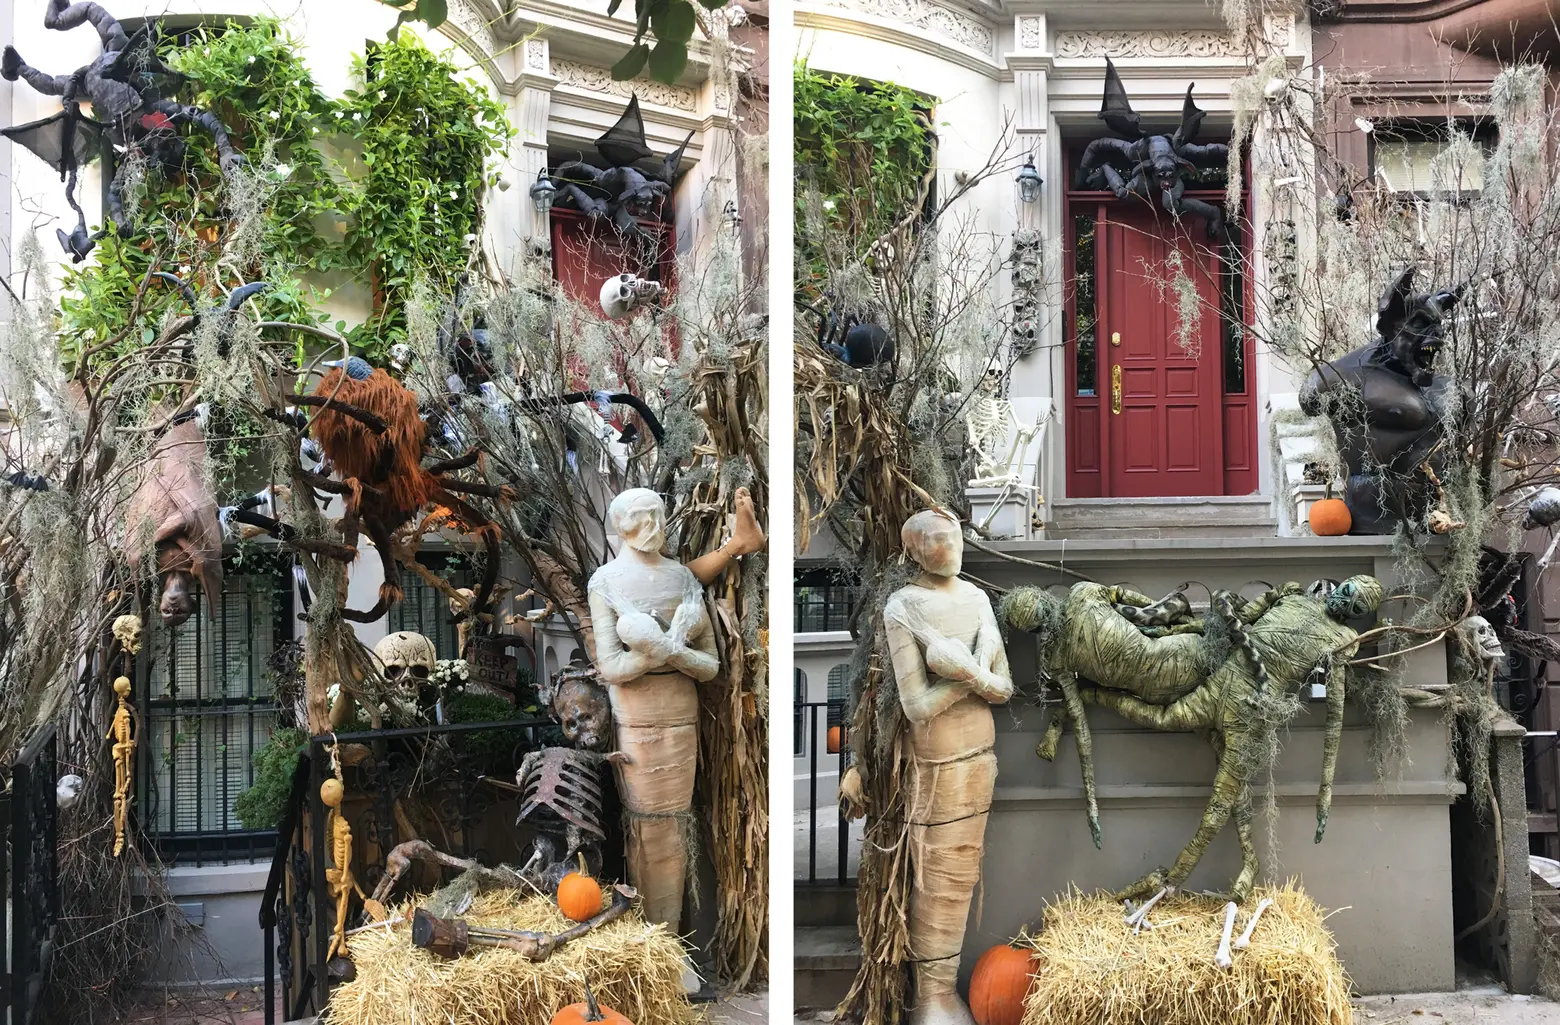 Upper East Side Halloween: Where To Find Spooky Fun